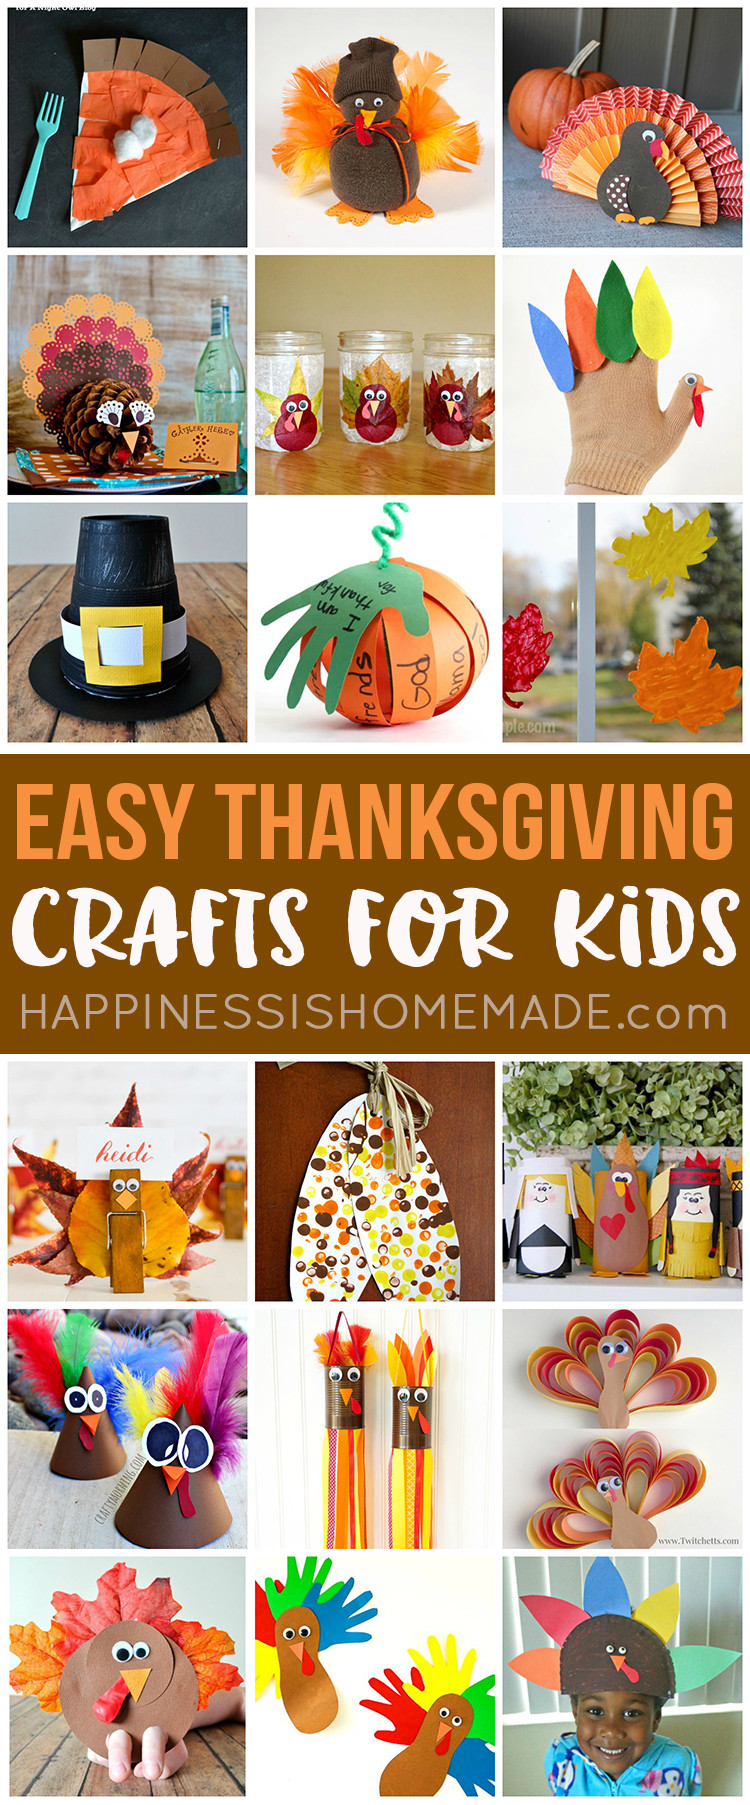 Homemade Crafts For Toddlers
 Easy Thanksgiving Crafts for Kids to Make Happiness is